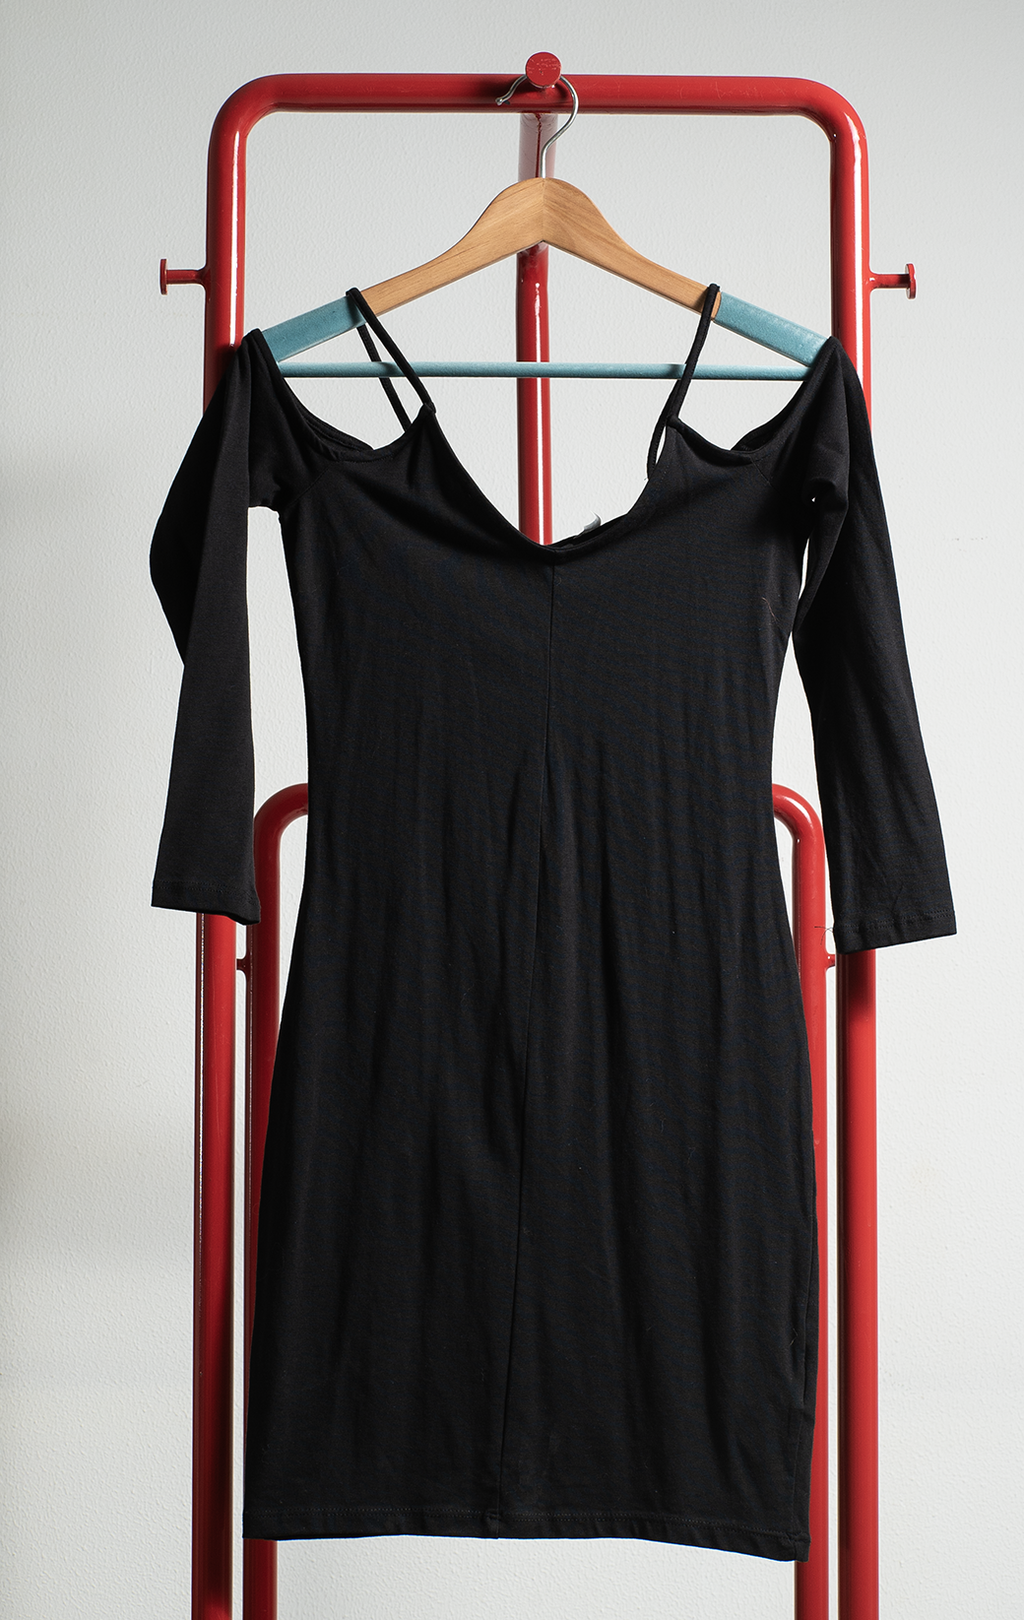 H&M DRESS - Black with cut outs - XSmall